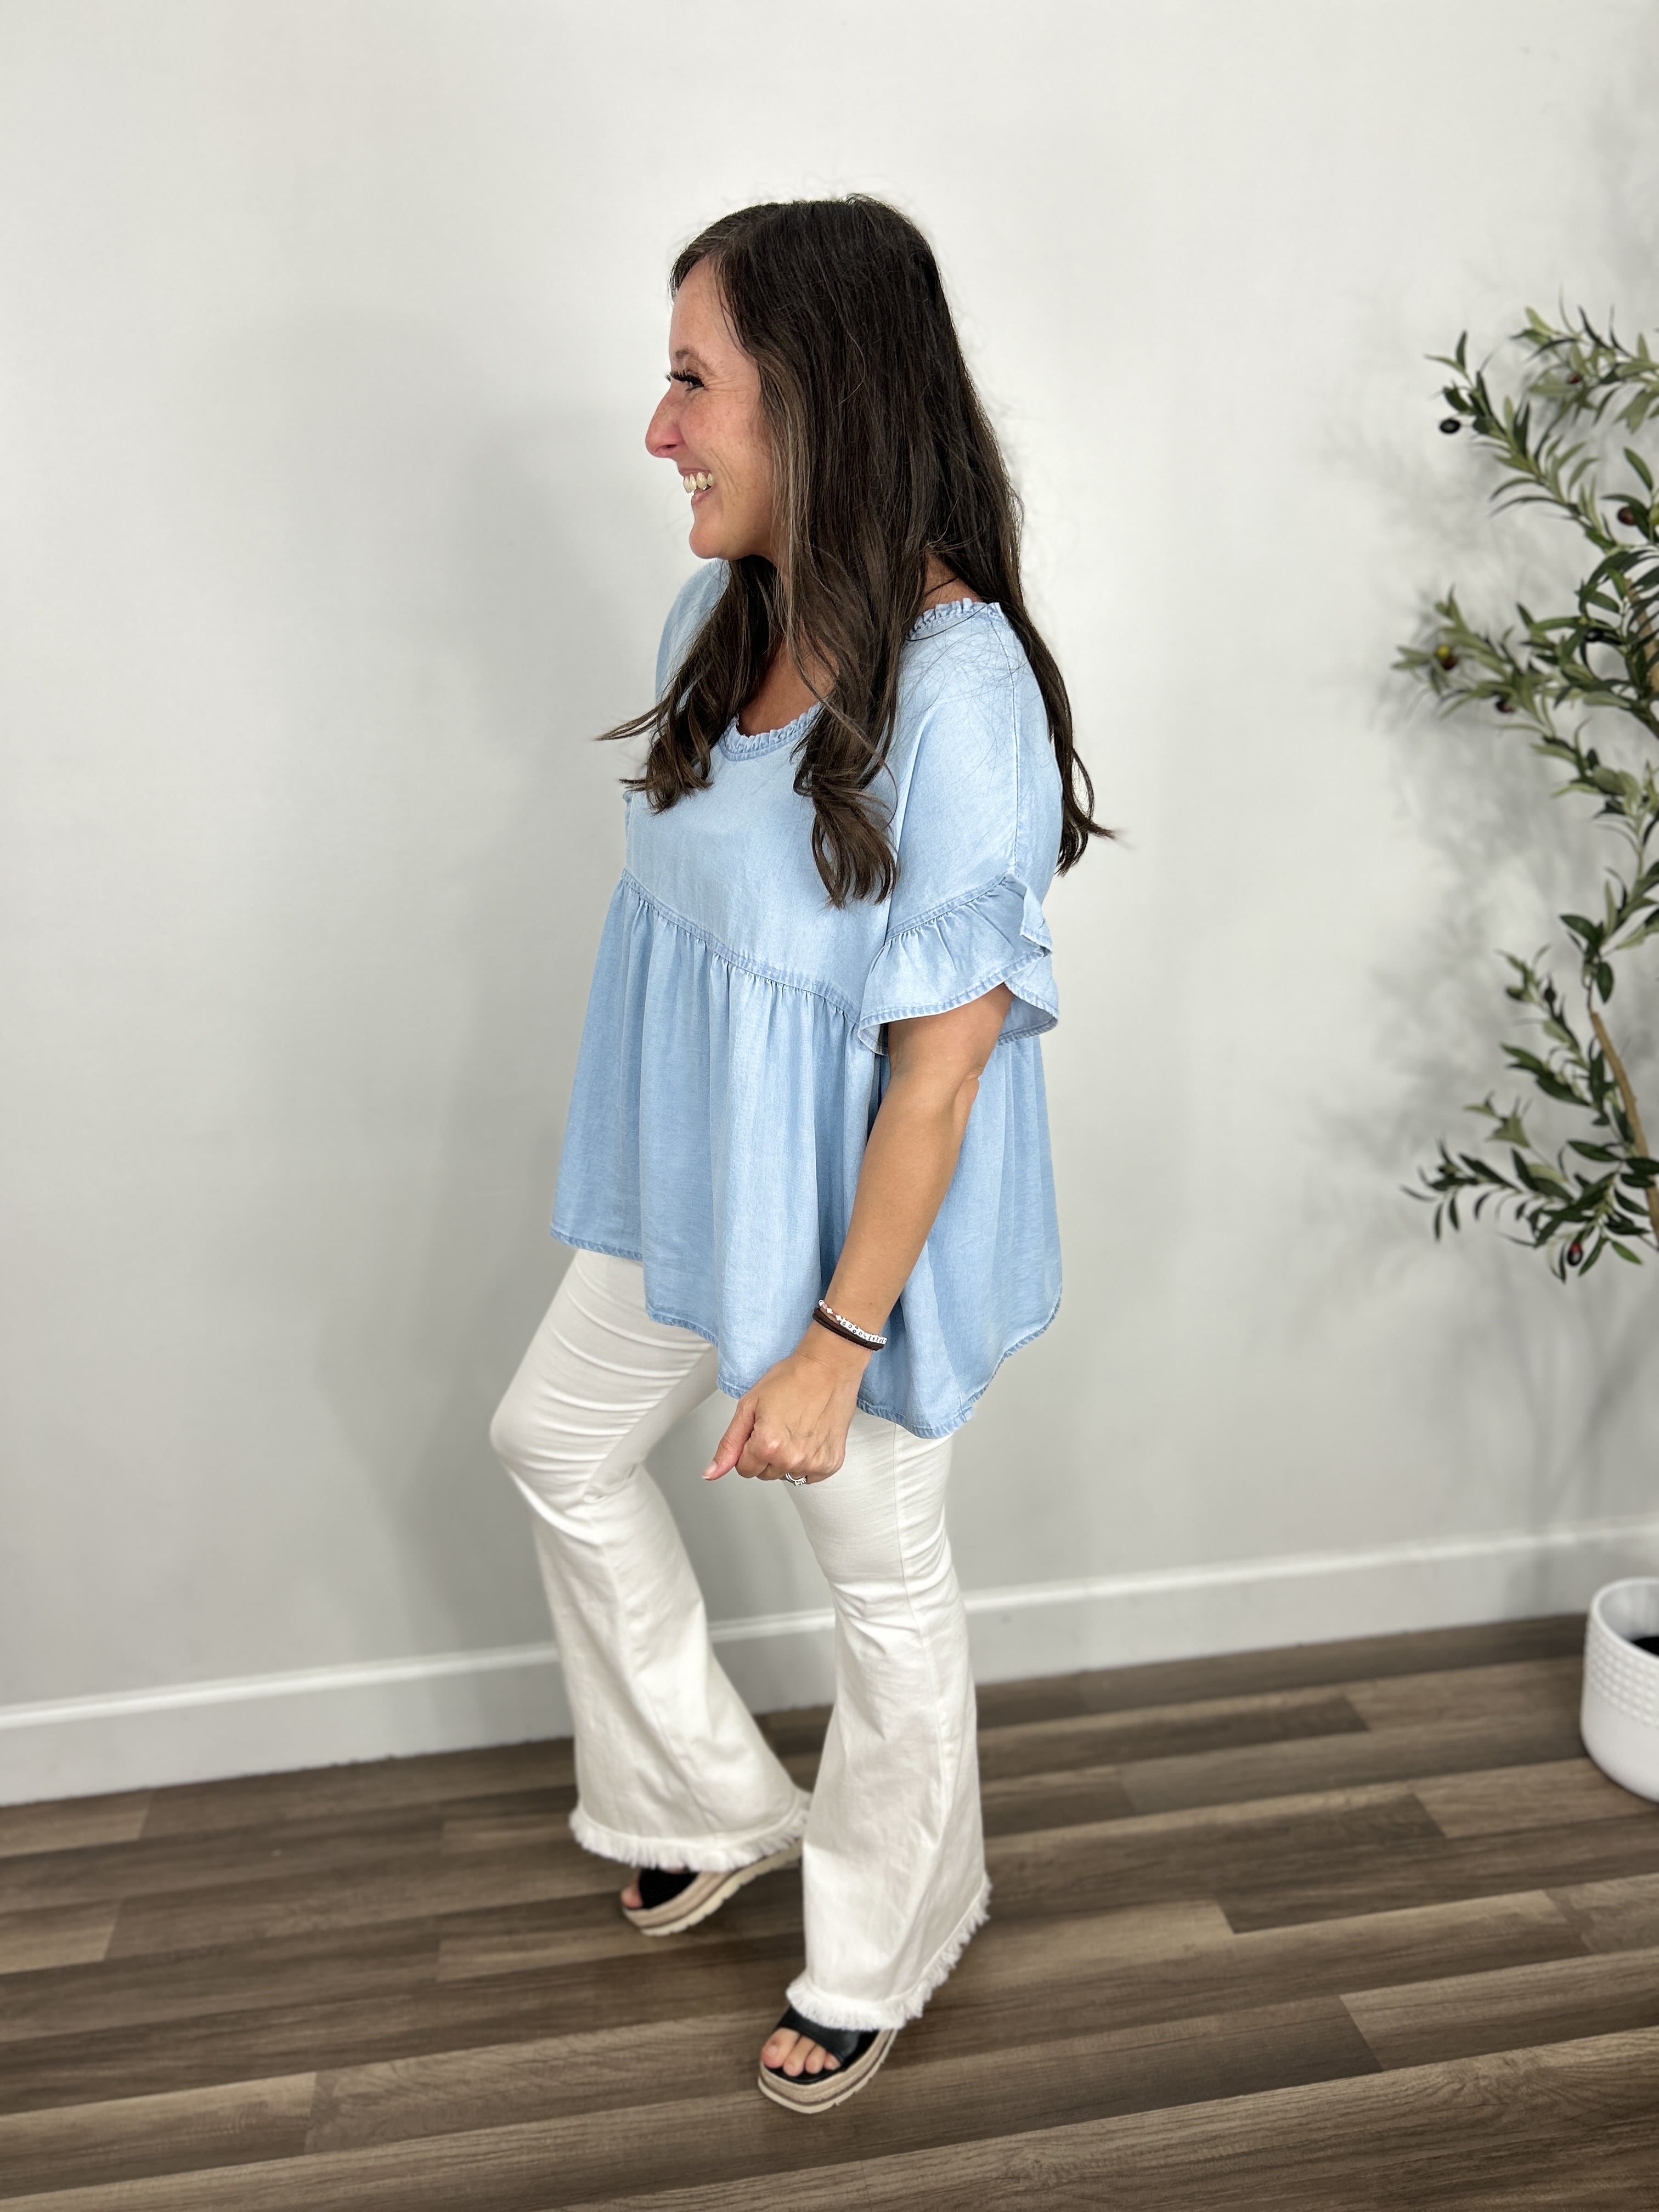 Women's chambray v neck short sleeve babydoll top paired with white flare pants and black sandals.